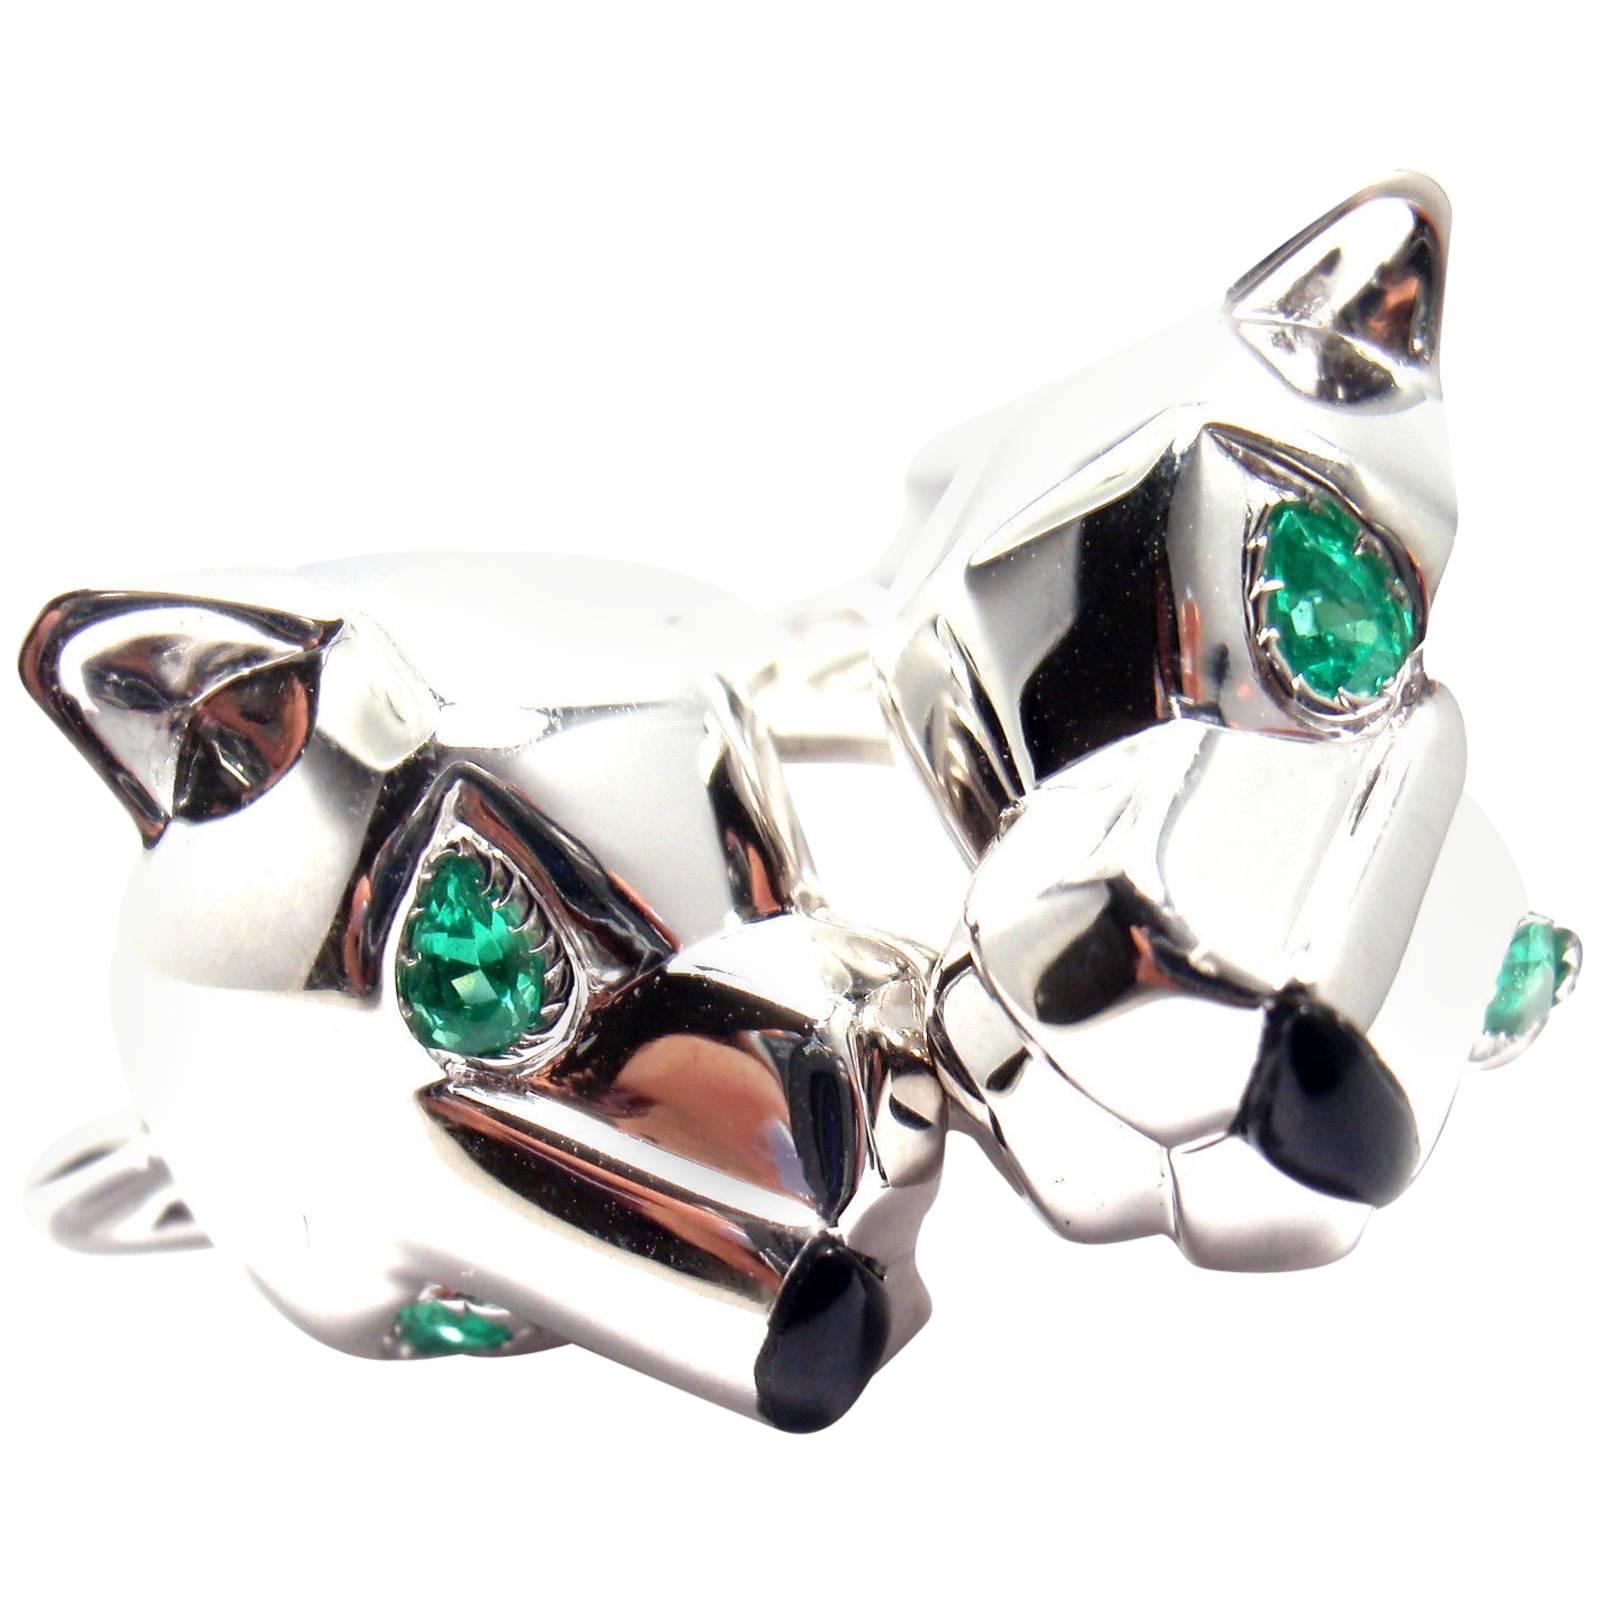 Cartier Panthere Panther Black Onyx Emerald Gold Cufflinks